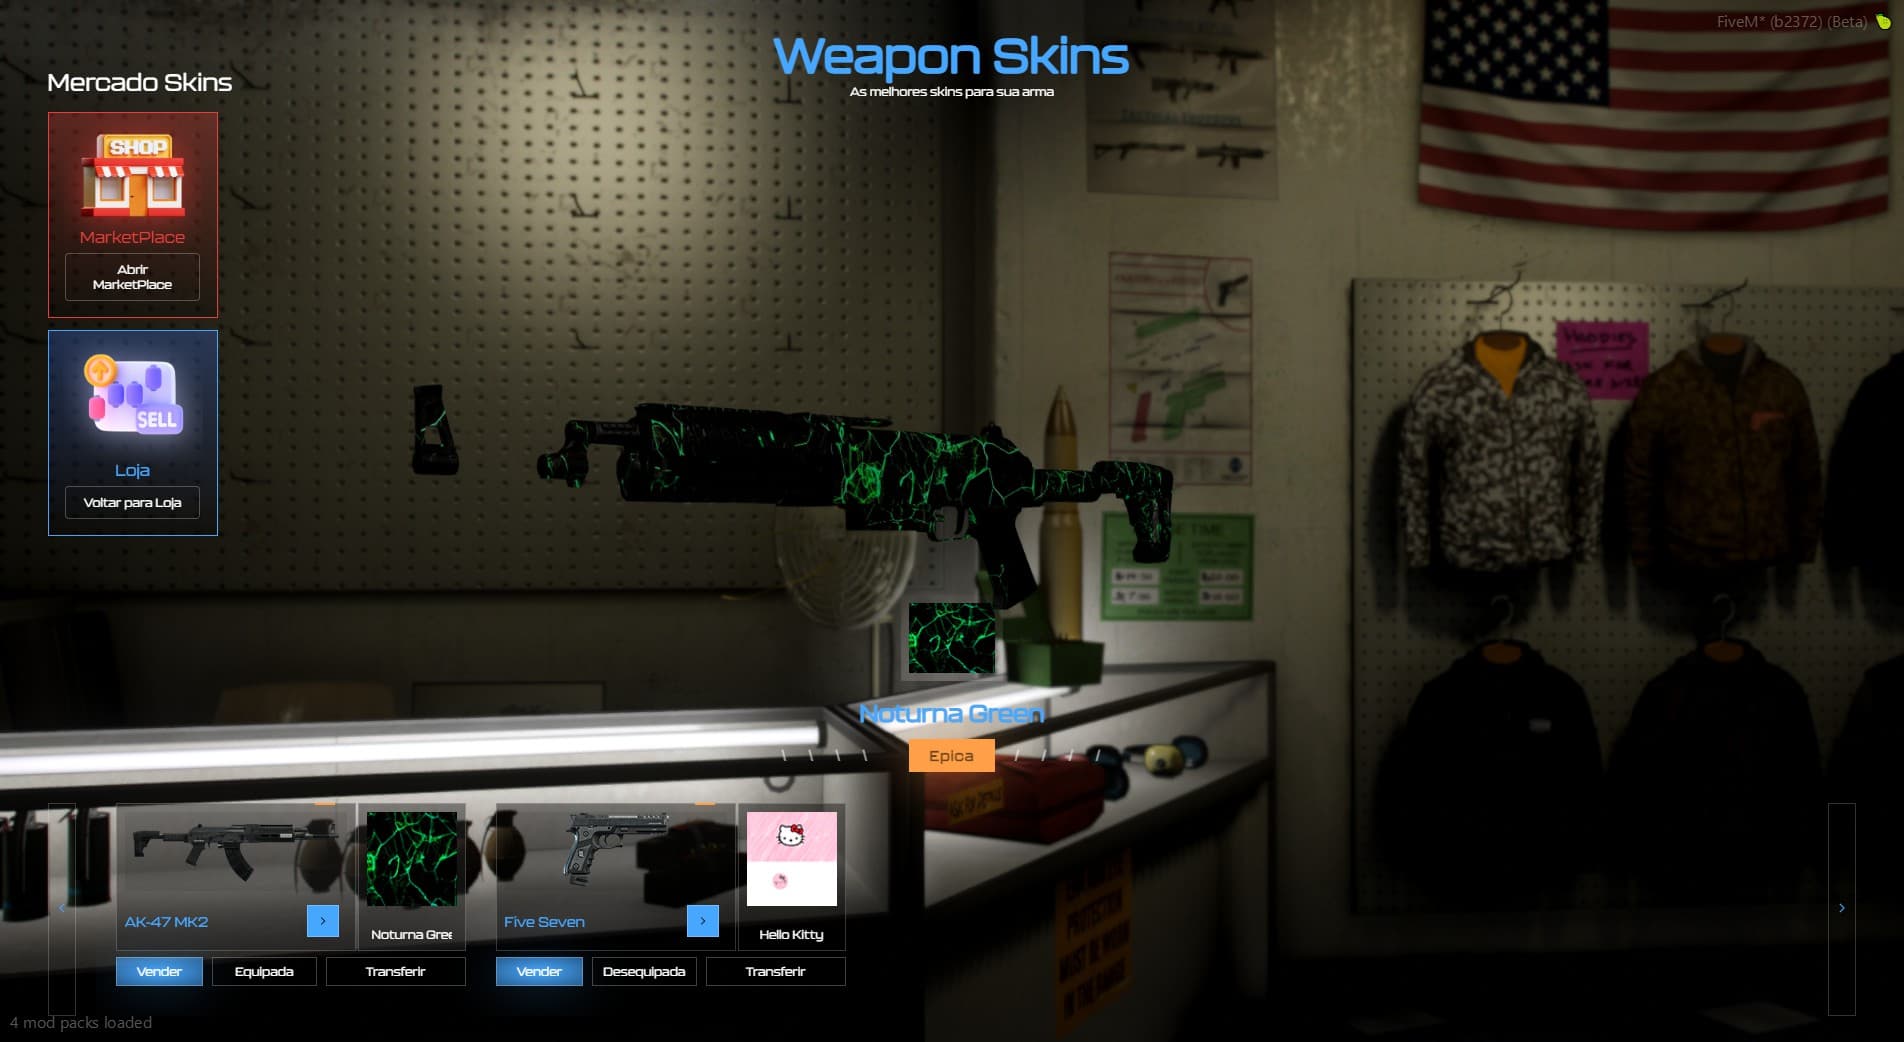 Issue with weapon skins in my game - Scripting Support - Developer Forum